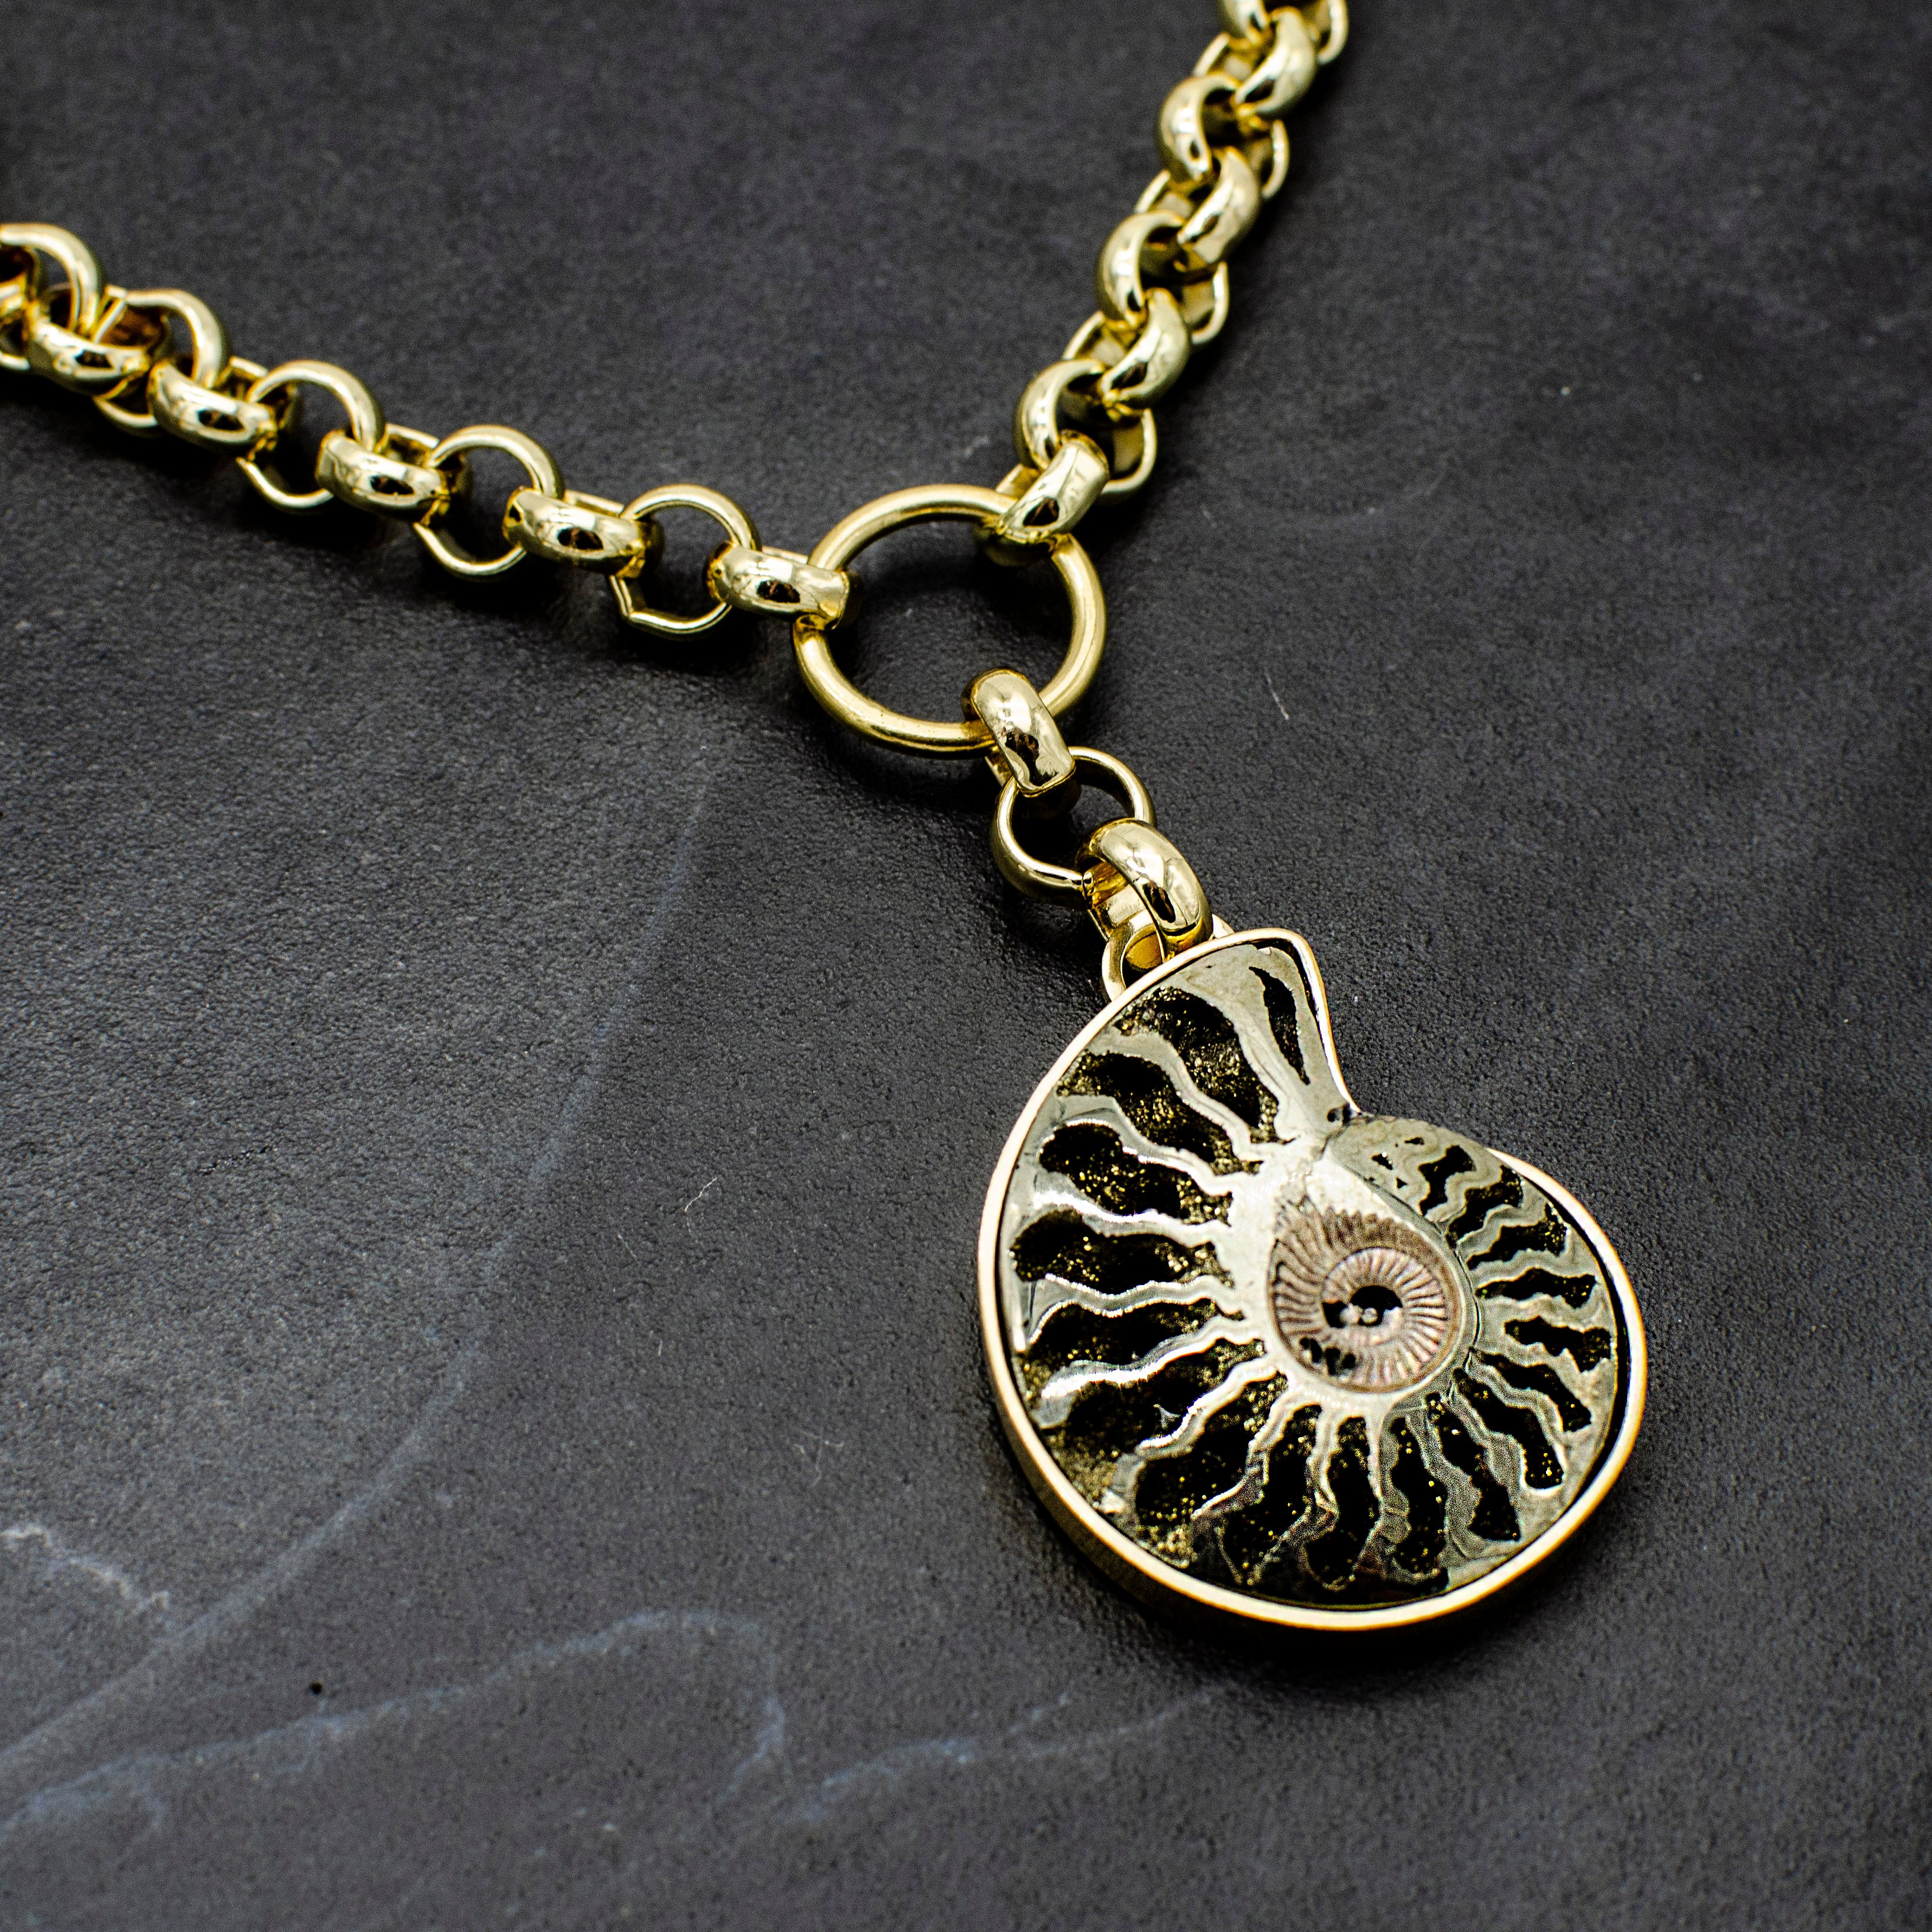 Rianna Necklace with Pyrite Ammonite